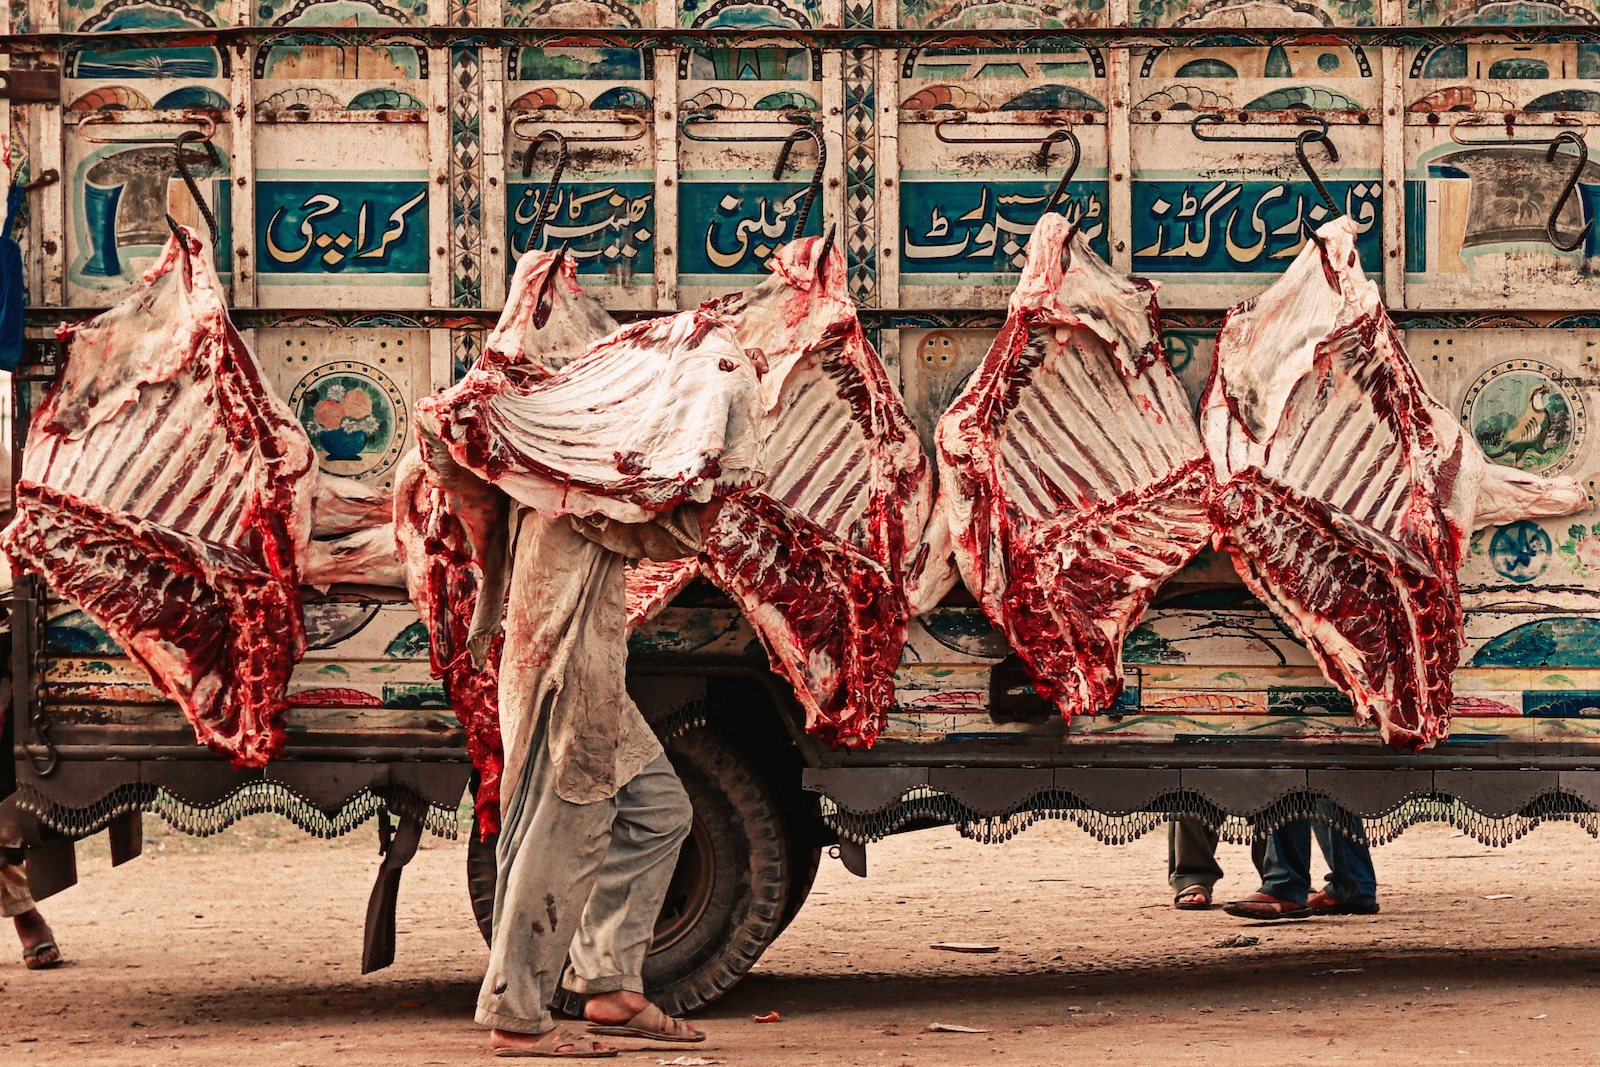 A man taking beef to the market in Karachi